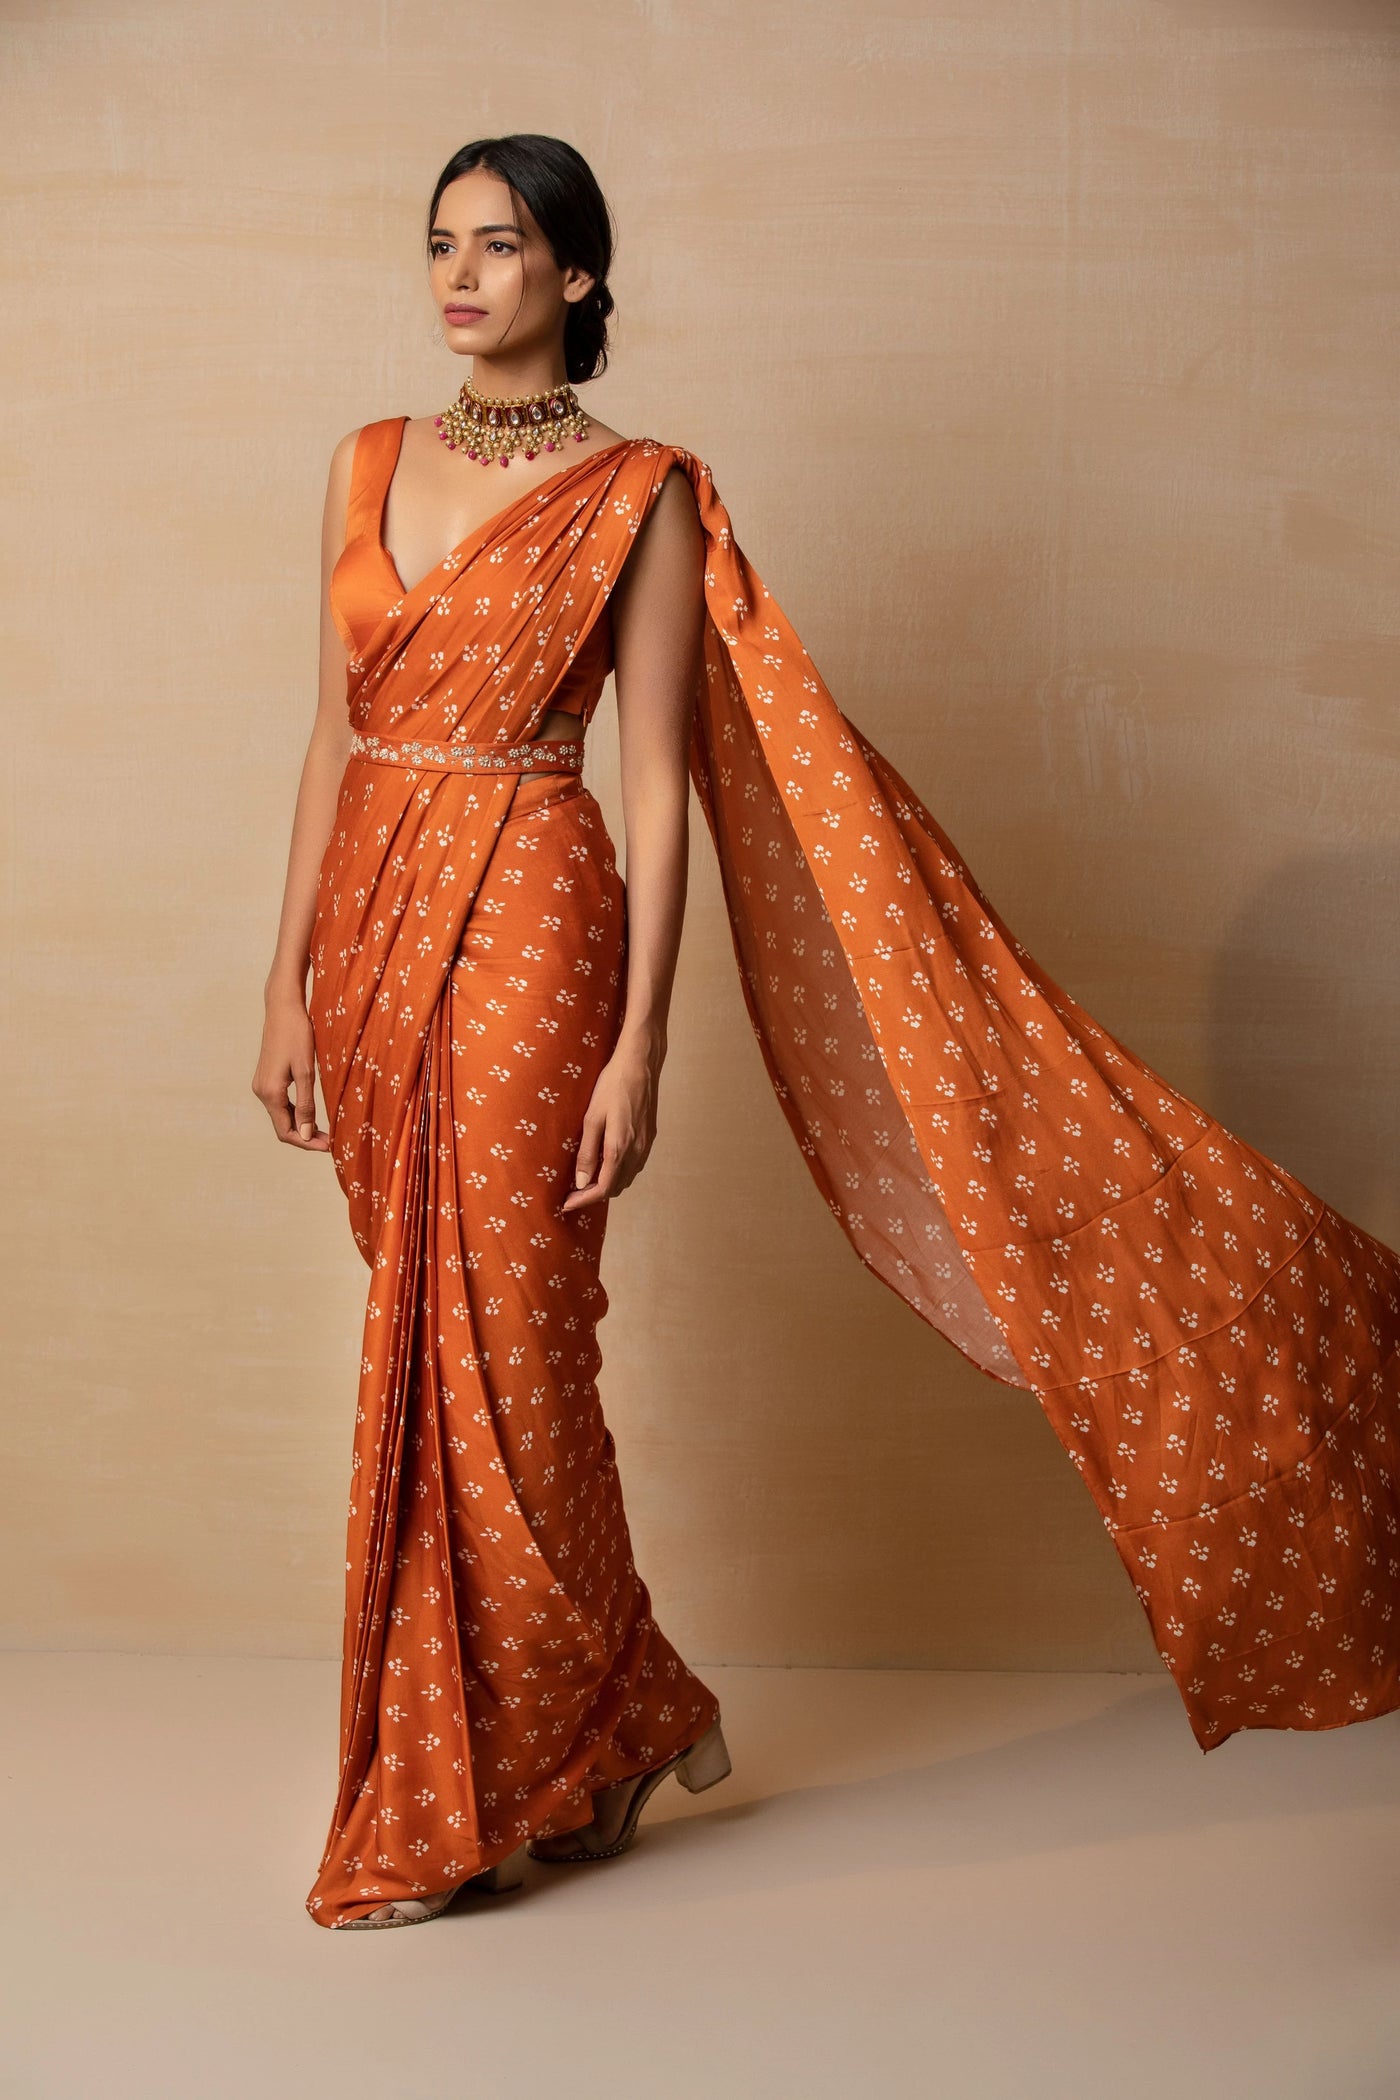 Rust Printed Draped Saree Indian Clothing in Denver, CO, Aurora, CO, Boulder, CO, Fort Collins, CO, Colorado Springs, CO, Parker, CO, Highlands Ranch, CO, Cherry Creek, CO, Centennial, CO, and Longmont, CO. NATIONWIDE SHIPPING USA- India Fashion X